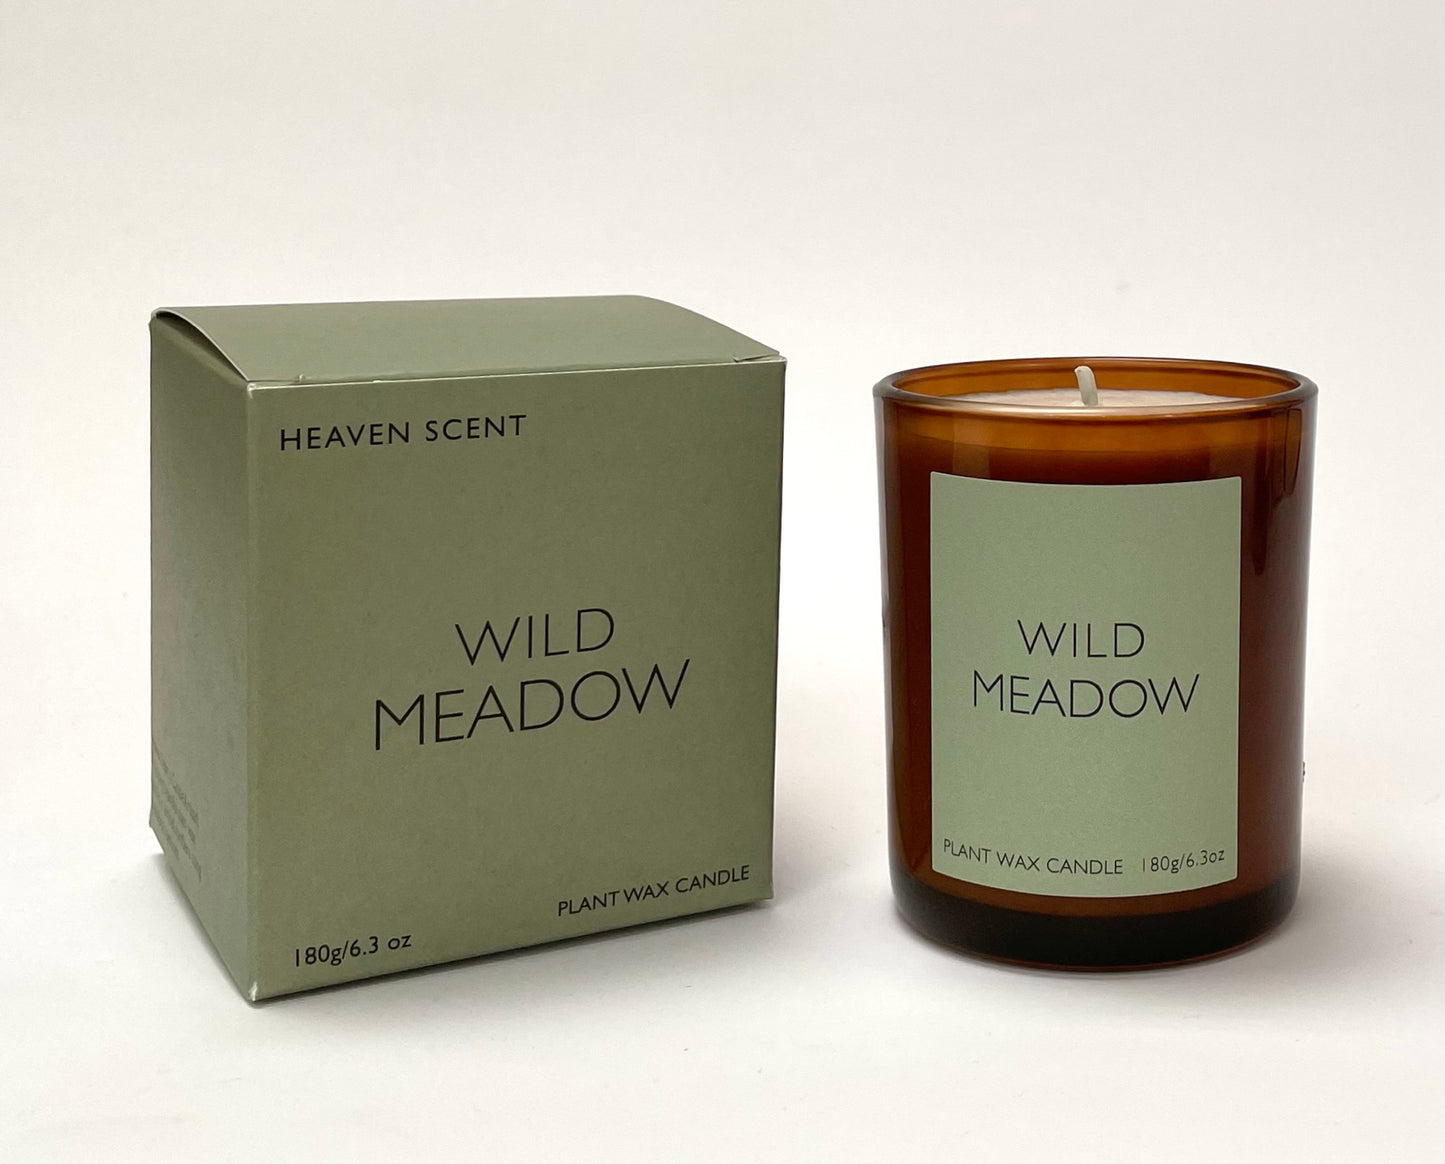 Wild Meadow 20cl Amber Glass Candle by Heaven Scent